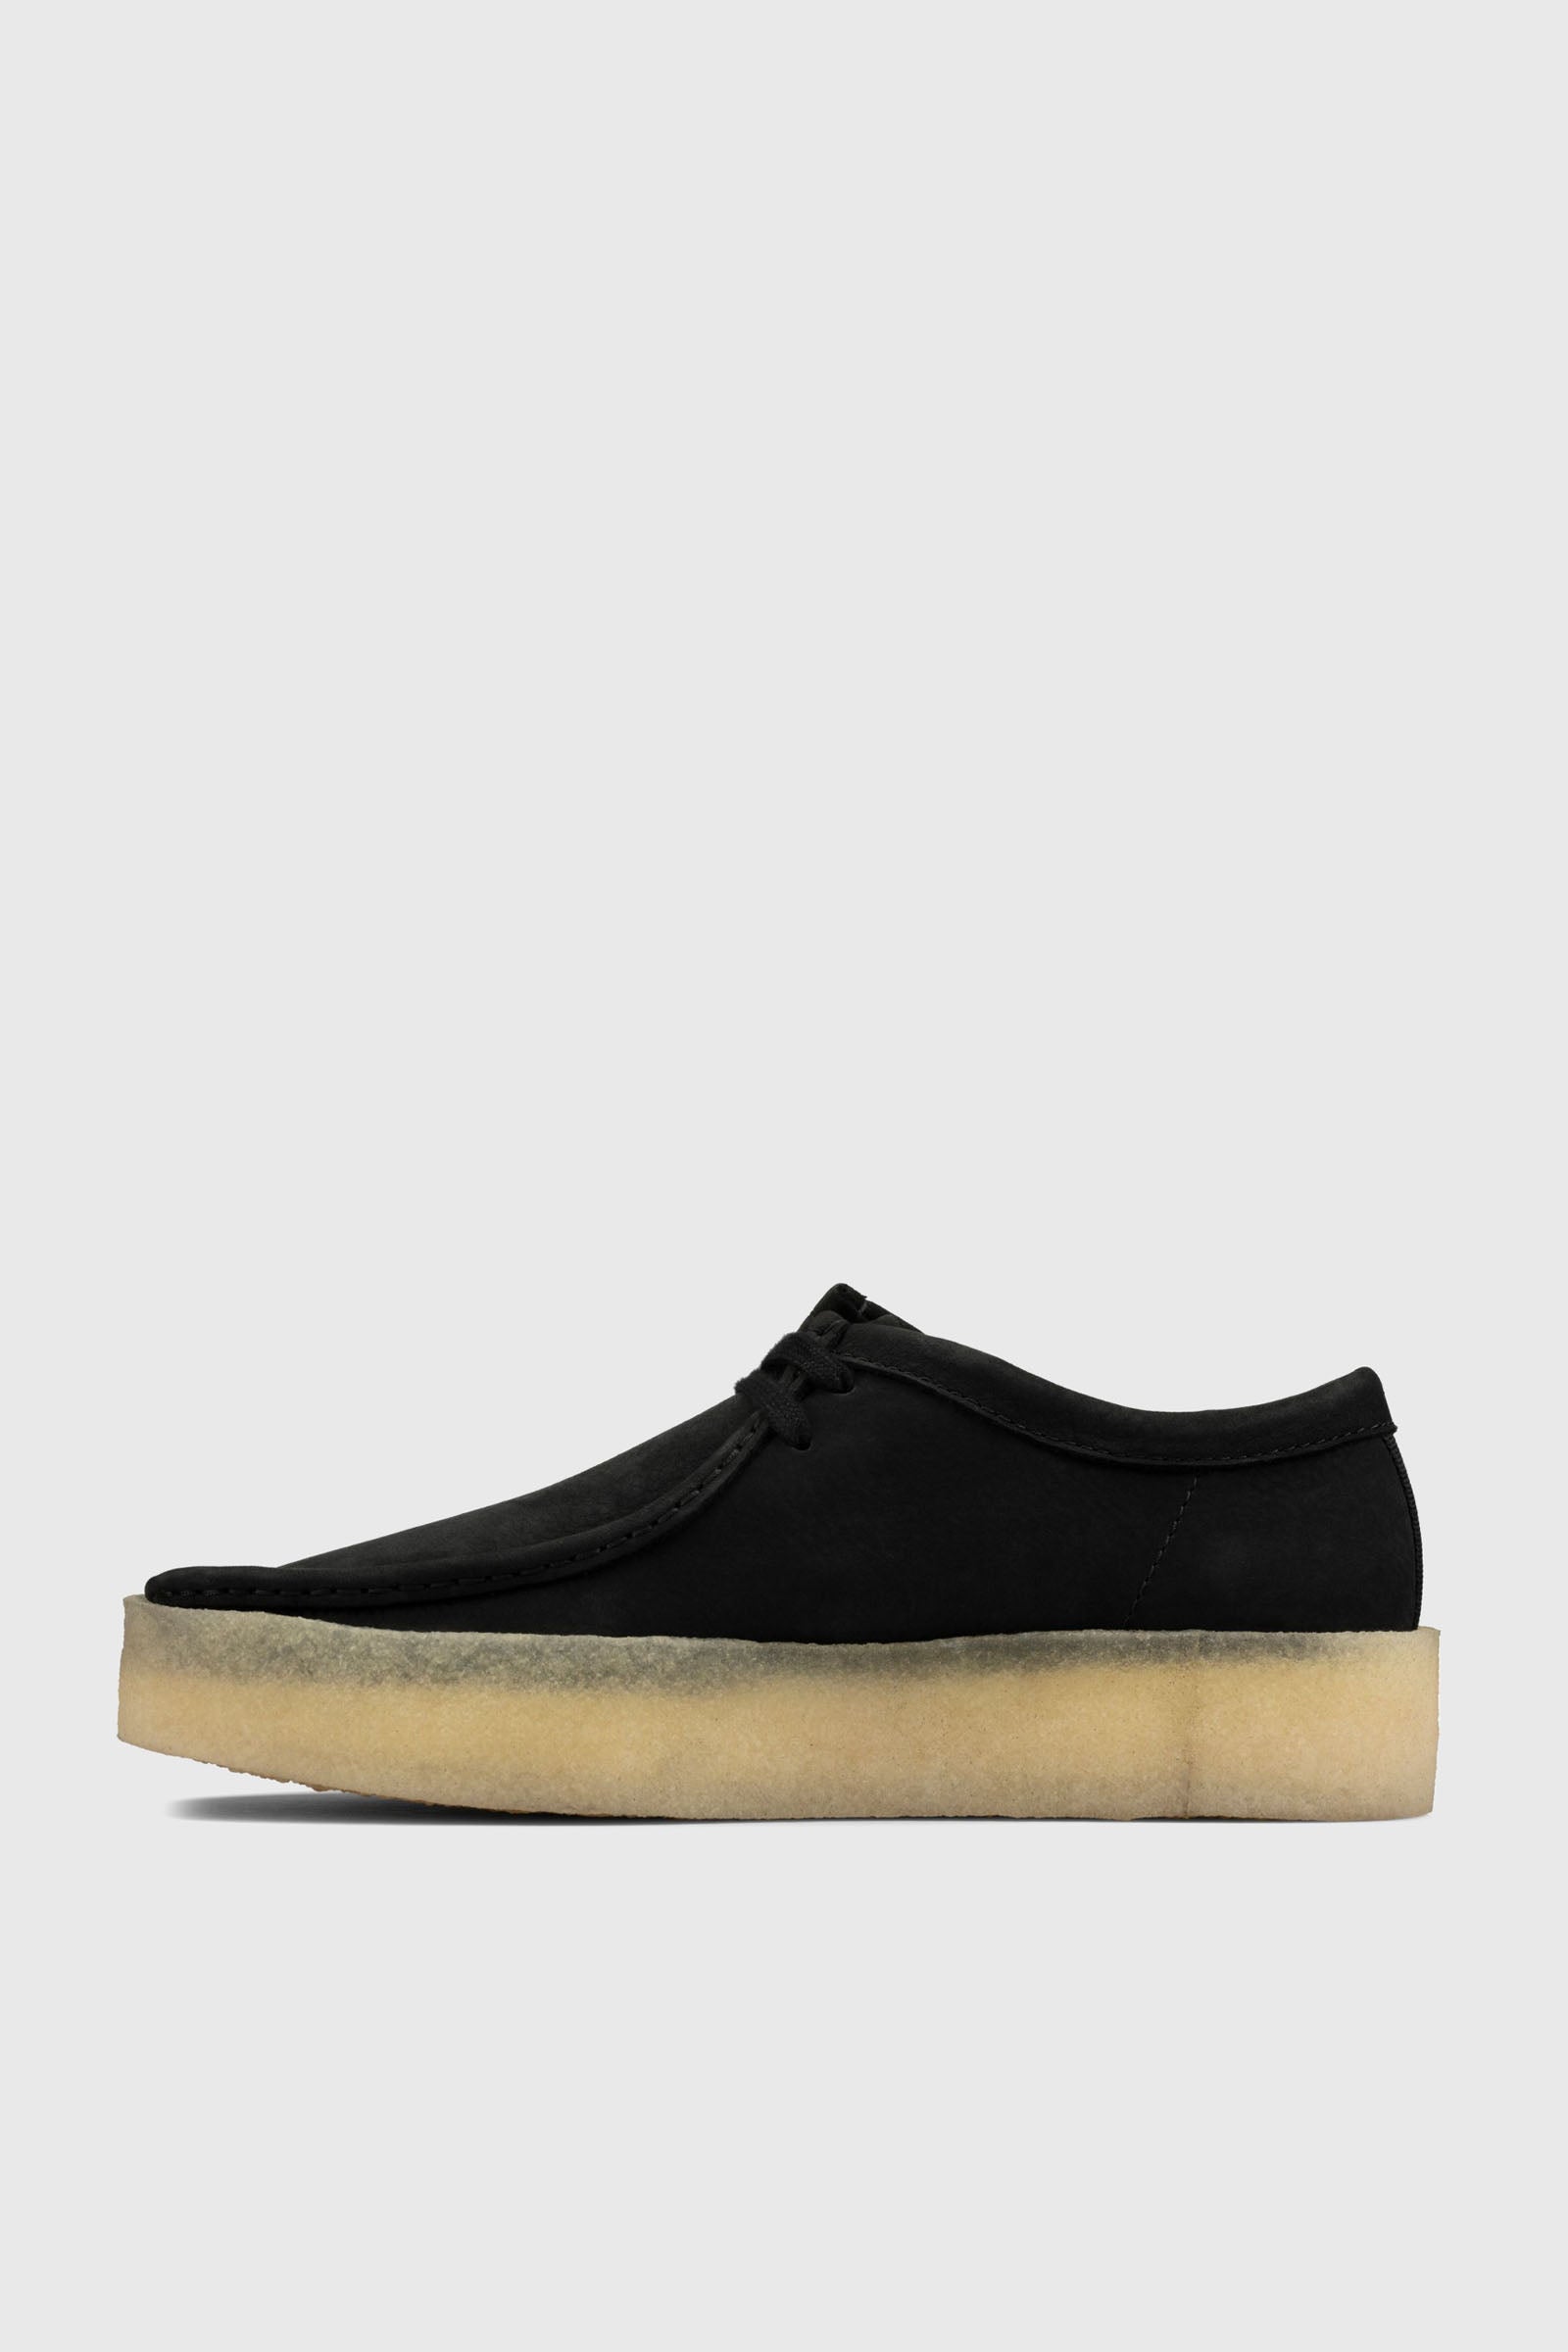 "Clarks Wallabee Cup Black Leather Shoe for Men" - 9